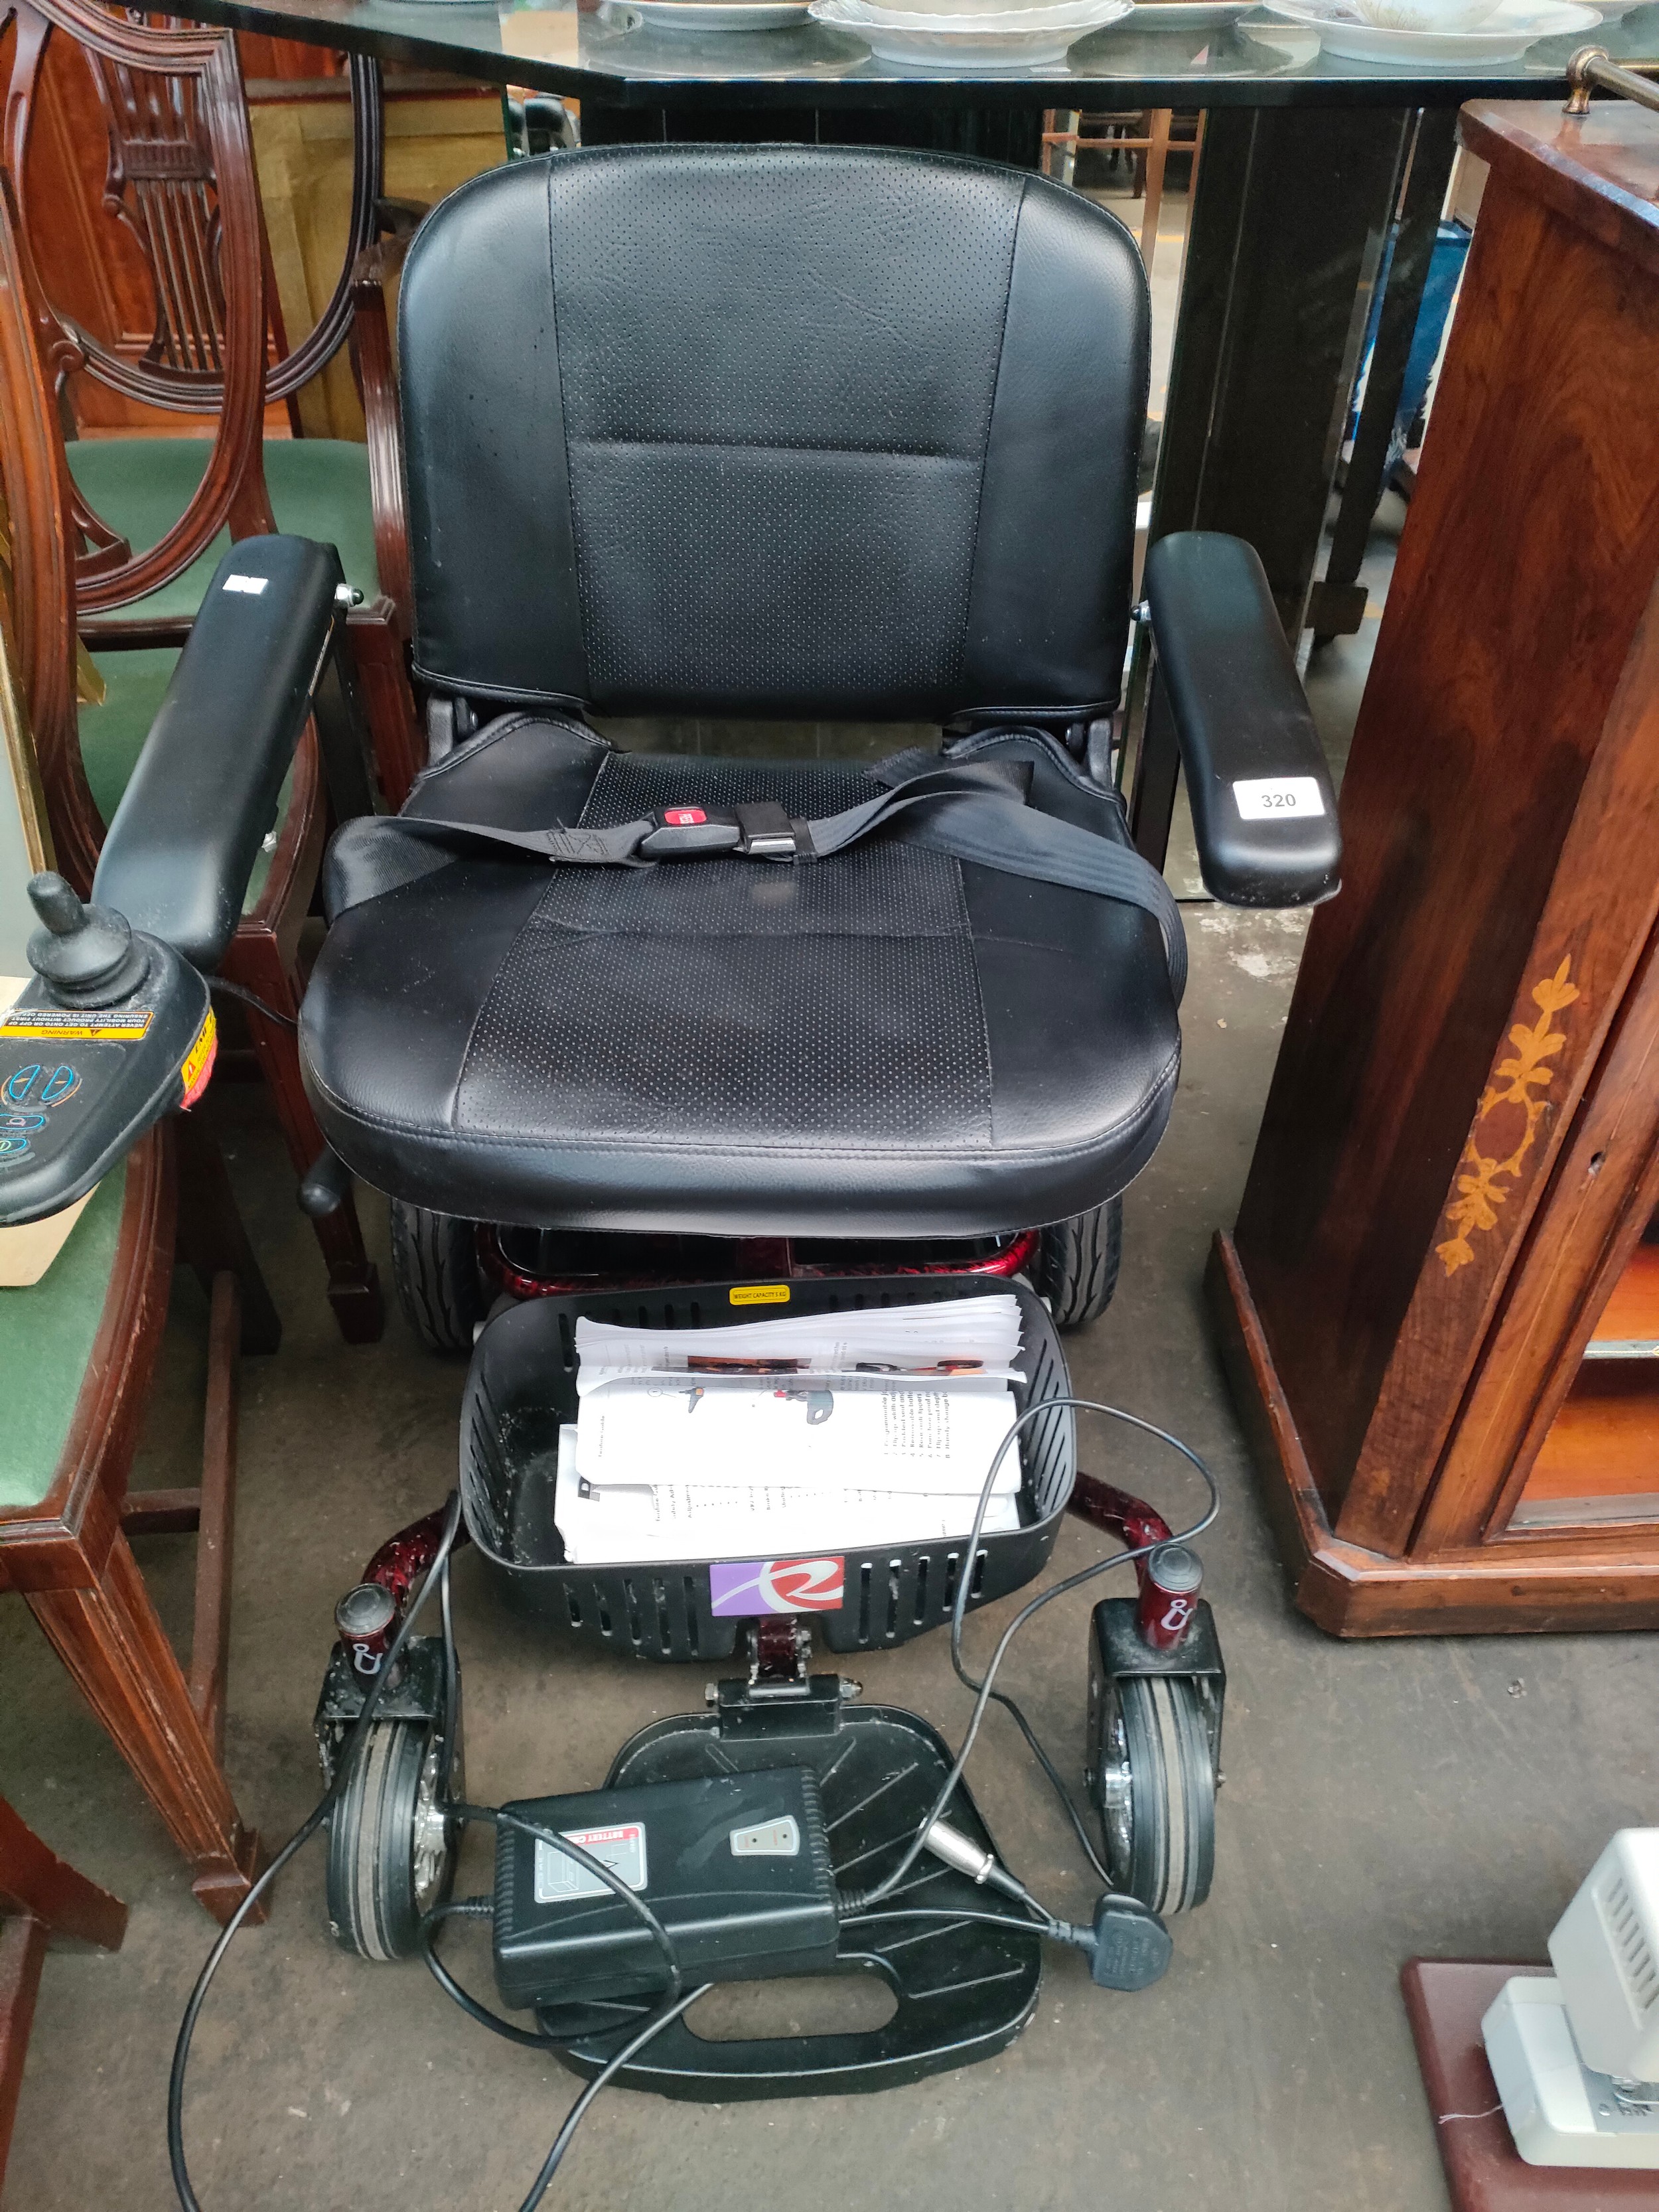 Roma Disability scooter, comes with charger and booklet. Not tested.